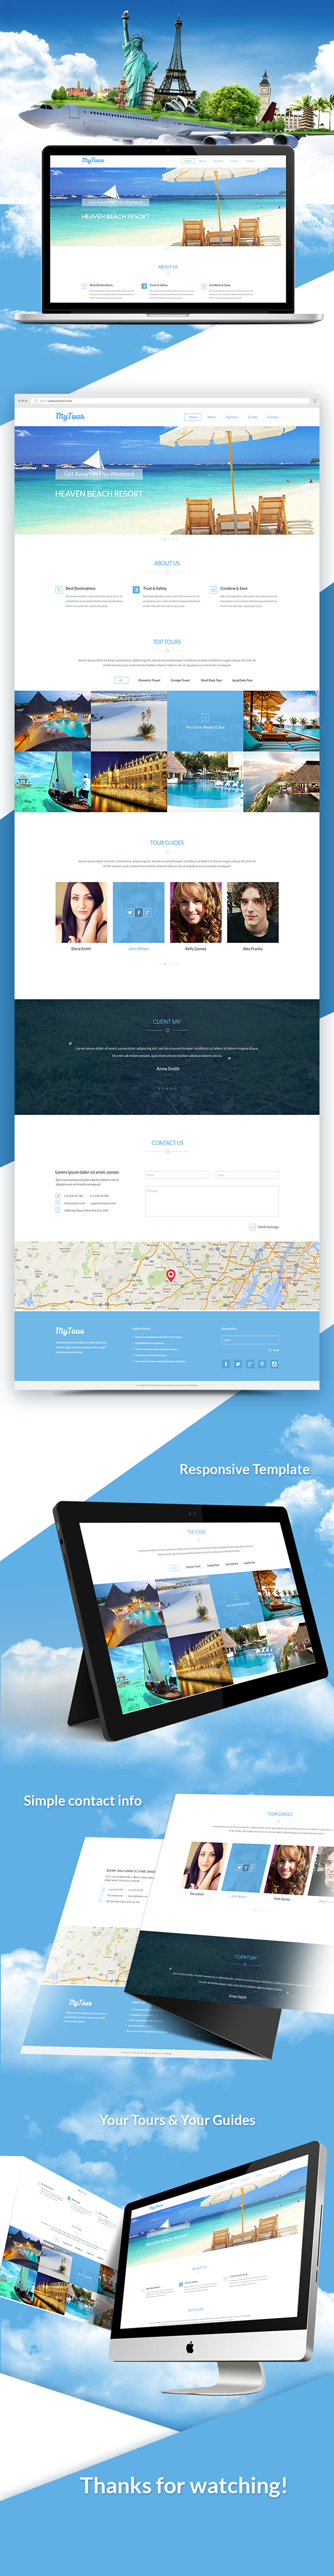 MyTour PSD Template For Travel or Tour Website Free download